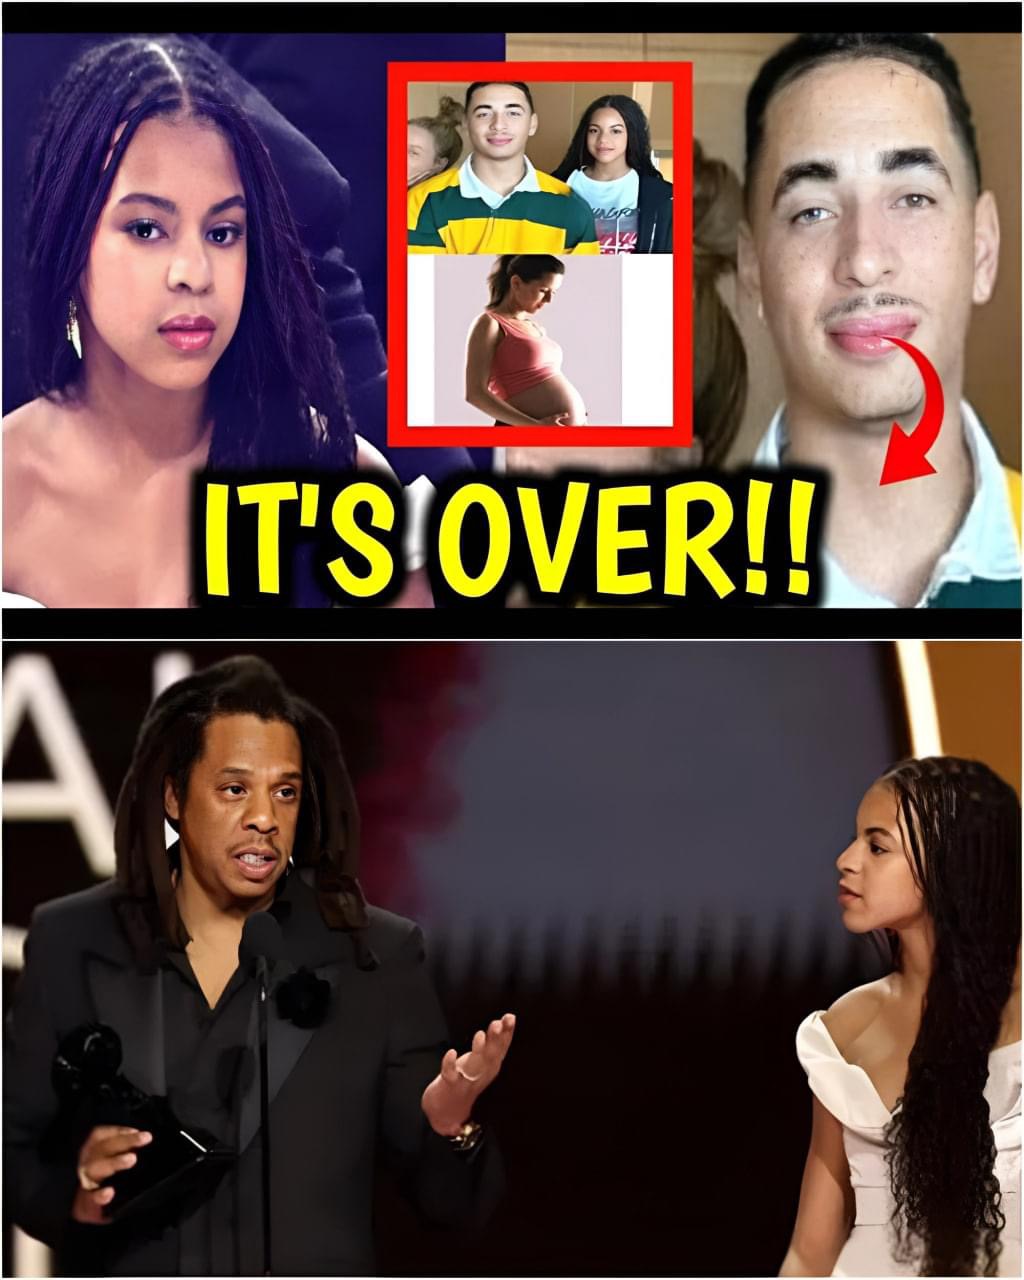 “I’m not the FATHER” Blue ivy Boyfriend BREAKS UP with her after REALISING blue ivy is pregnant